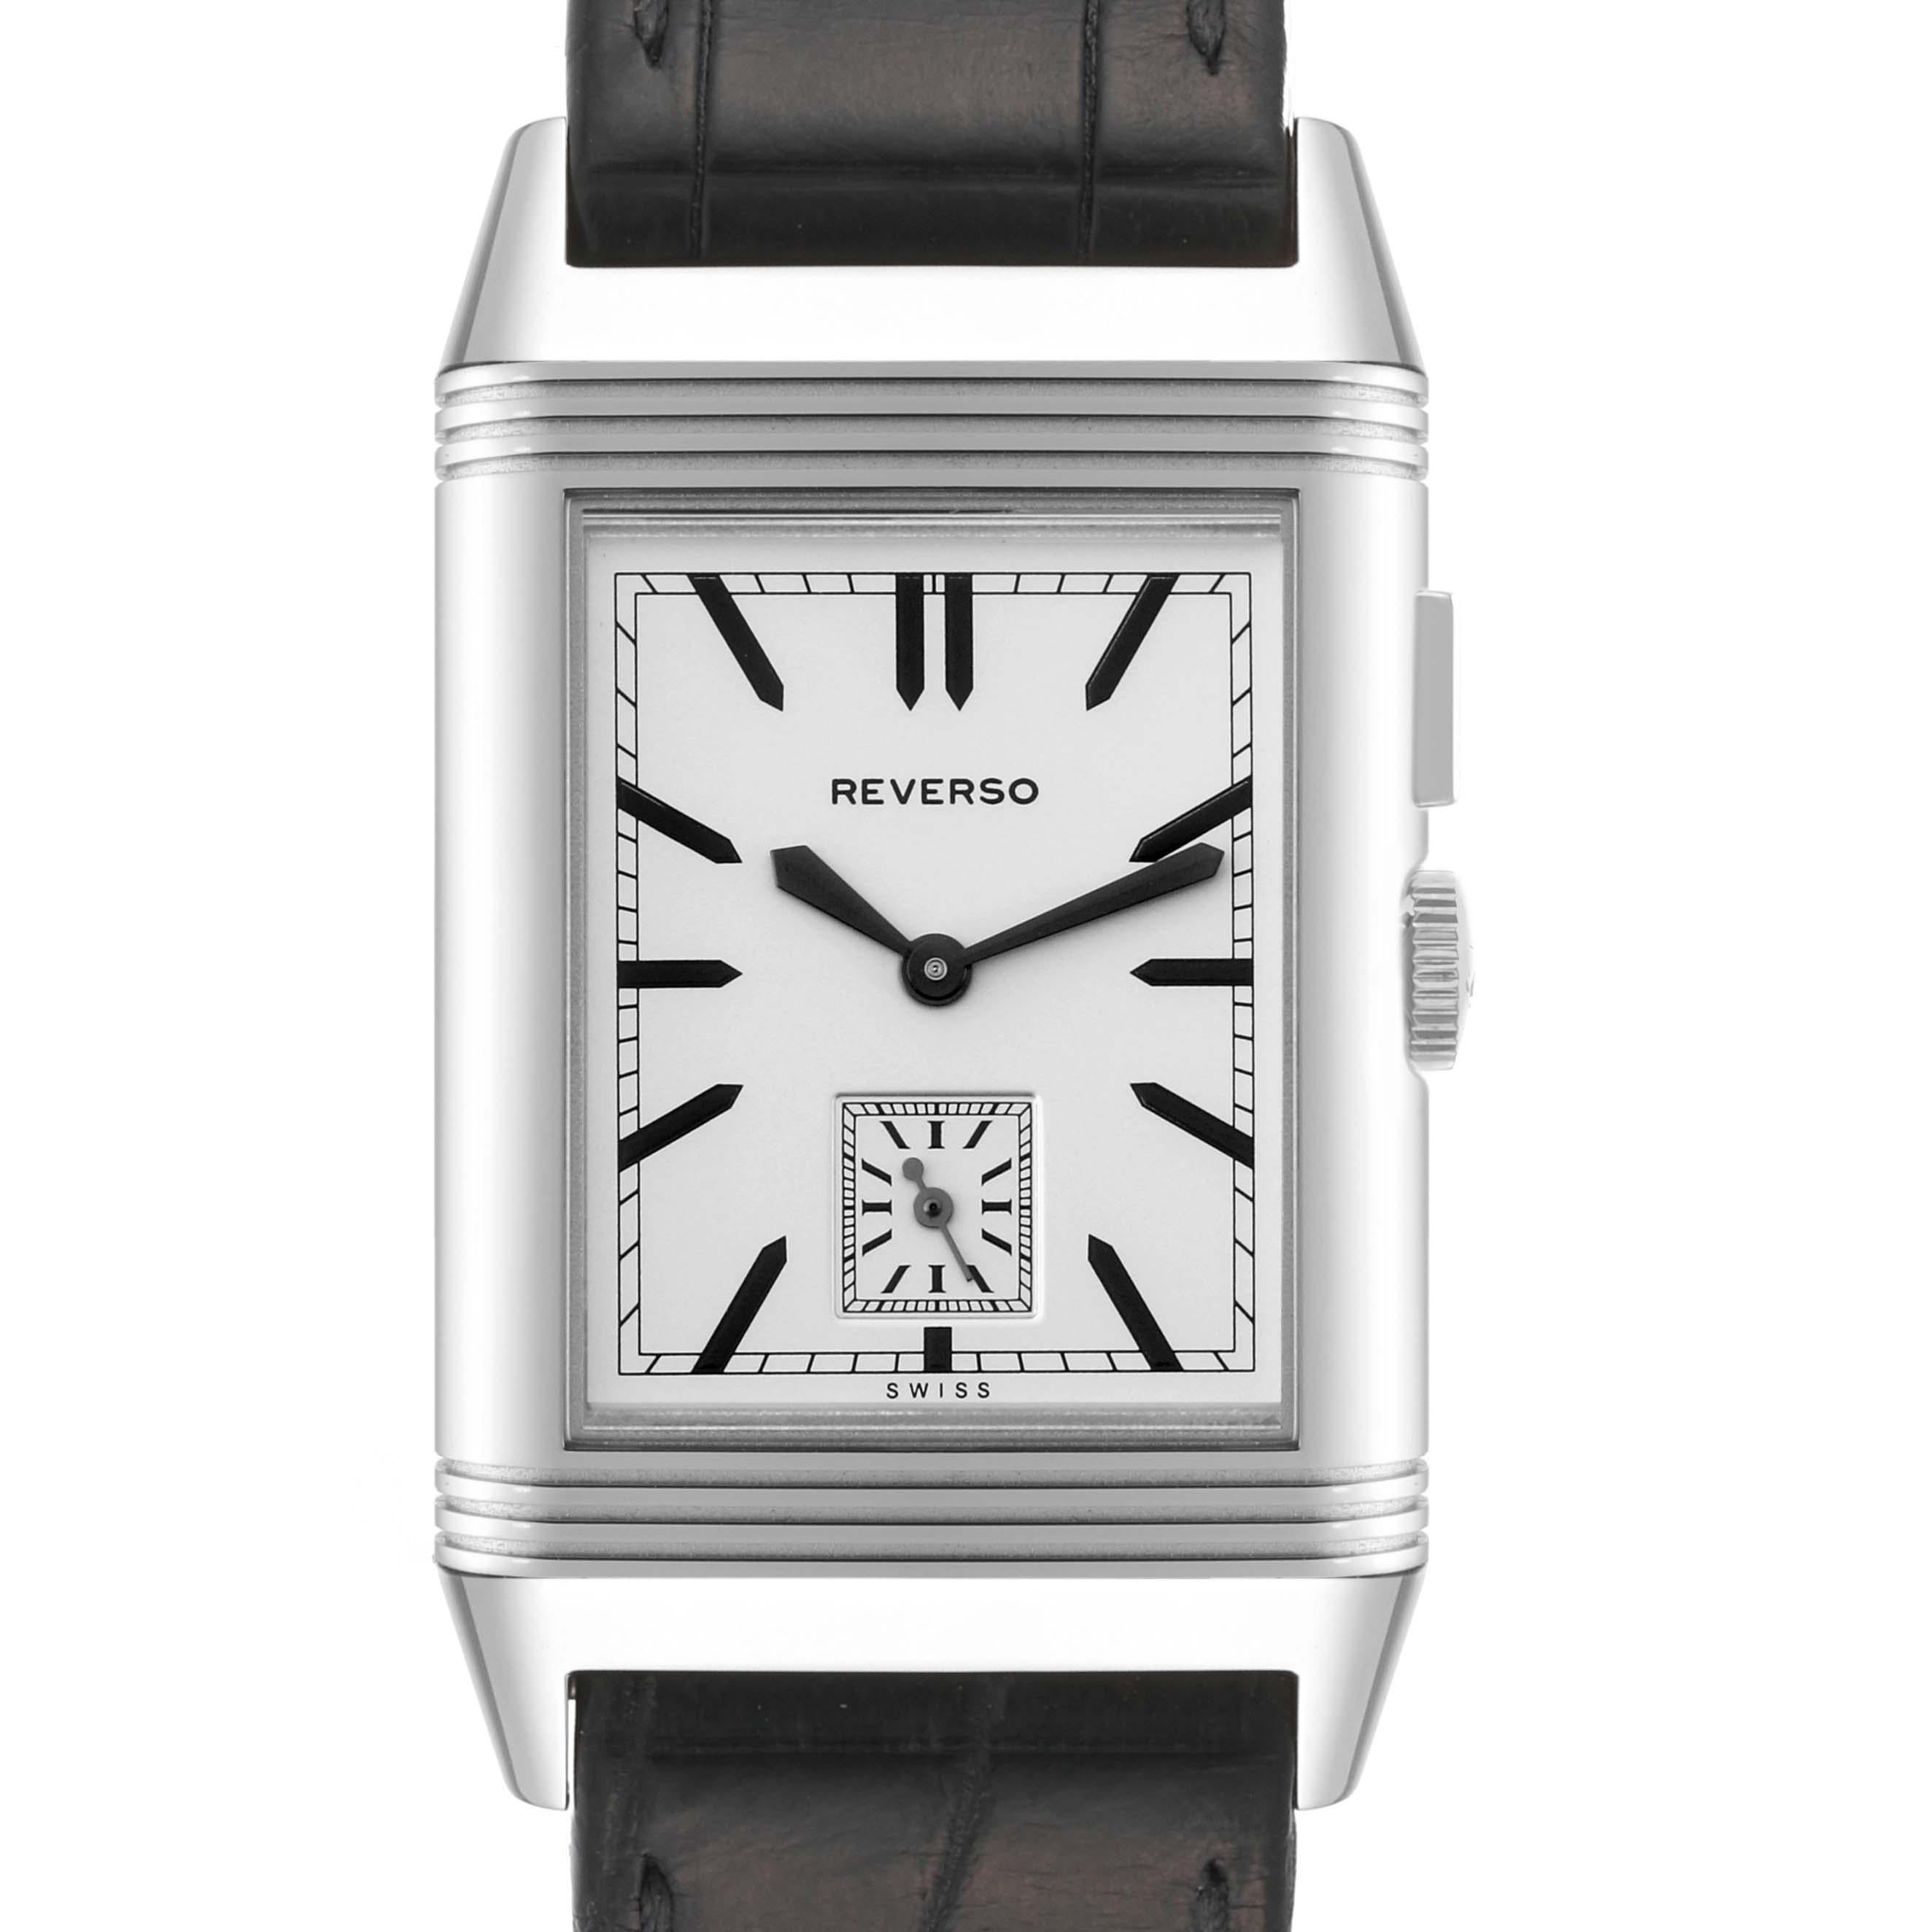 Jaeger LeCoultre Reverso Duo Day Night Steel Mens Watch 278.8.54 Q3788570. Manual winding movement. Stainless steel rectangular rotating case, 46.8 mm x 27.4 mm. Push button on the side of the case for second time zone. Stainless steel reeded bezel.